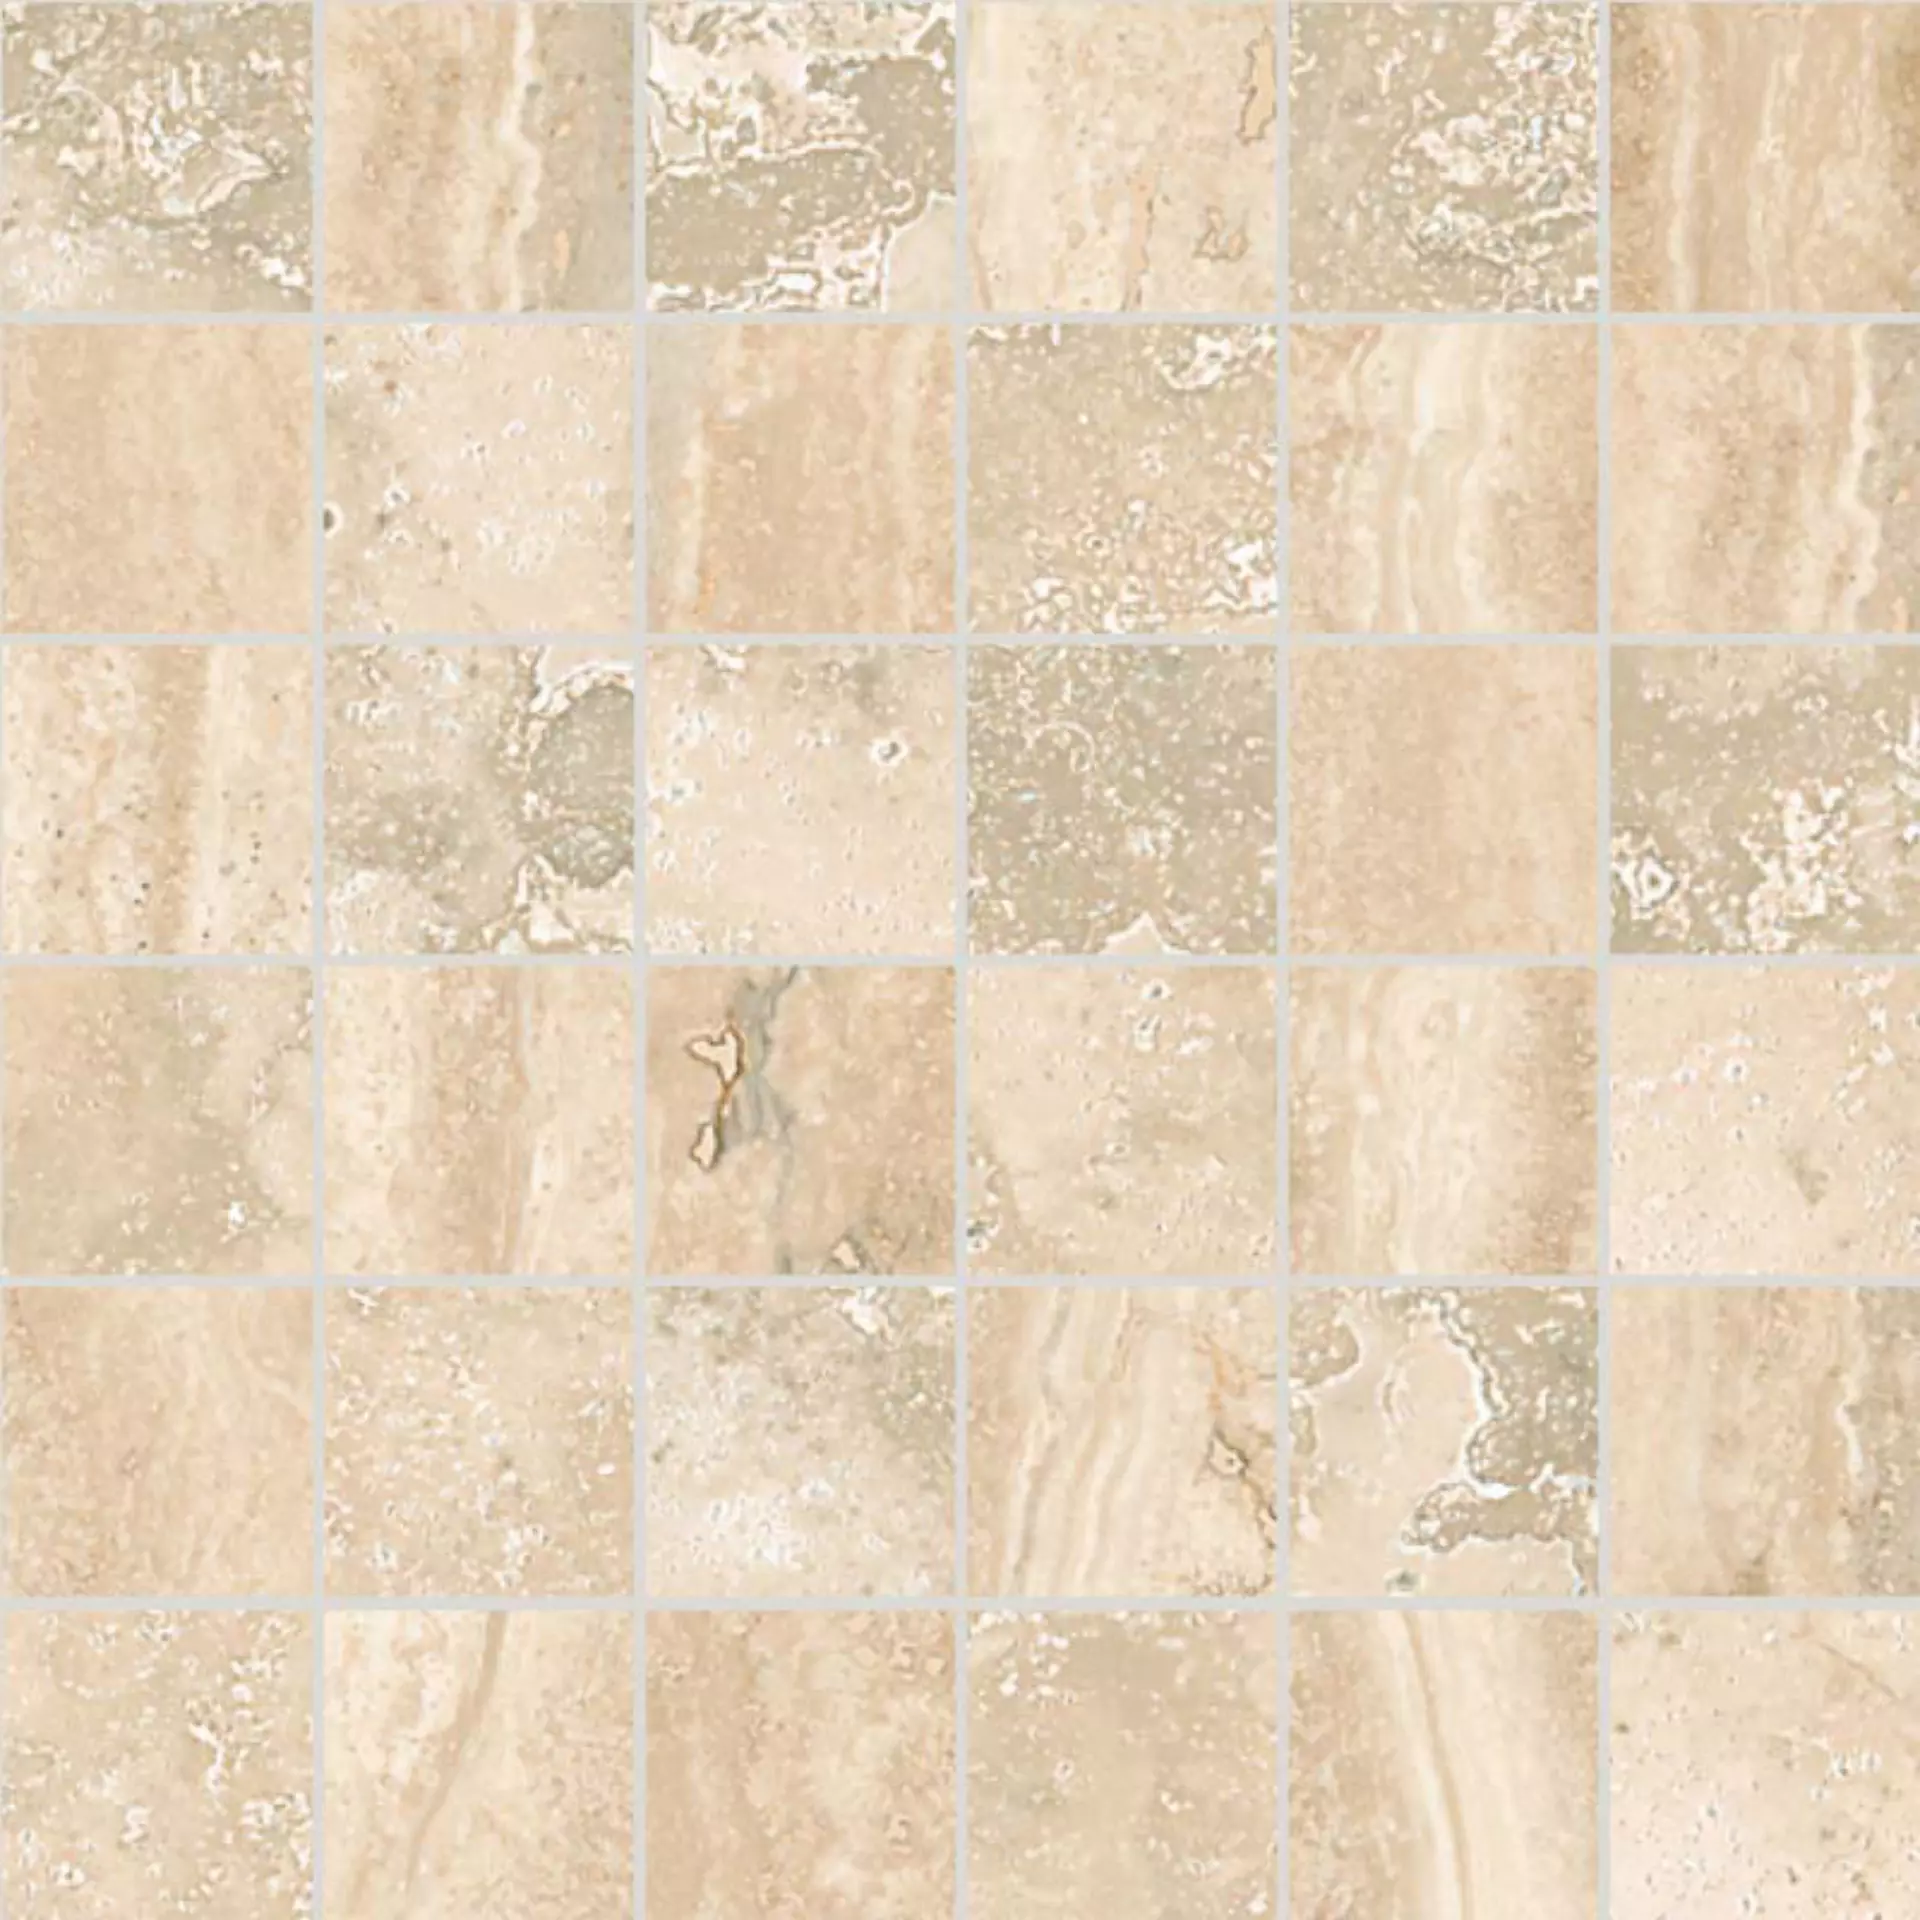 Sant Agostino Via Appia Beige Natural Mosaic CSAMAVCB30 30x30cm rectified 10mm